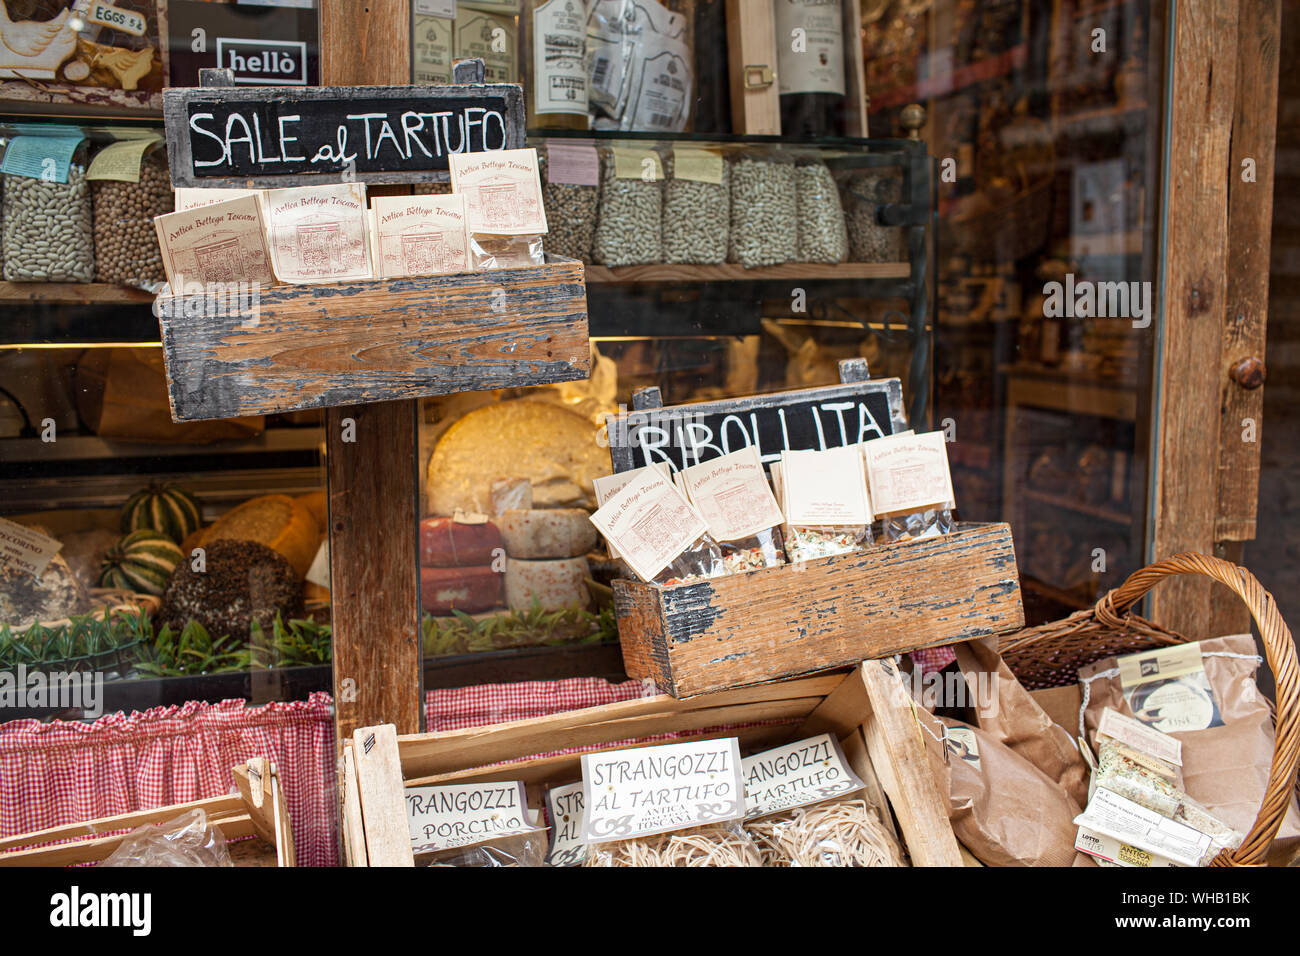 AREZZO, TUSCANY, ITALY - JANUARY 10, 2016: Typical Italian products displayed on the storefront of Antica Bottega Toscana, one of the oldest shops Stock Photo